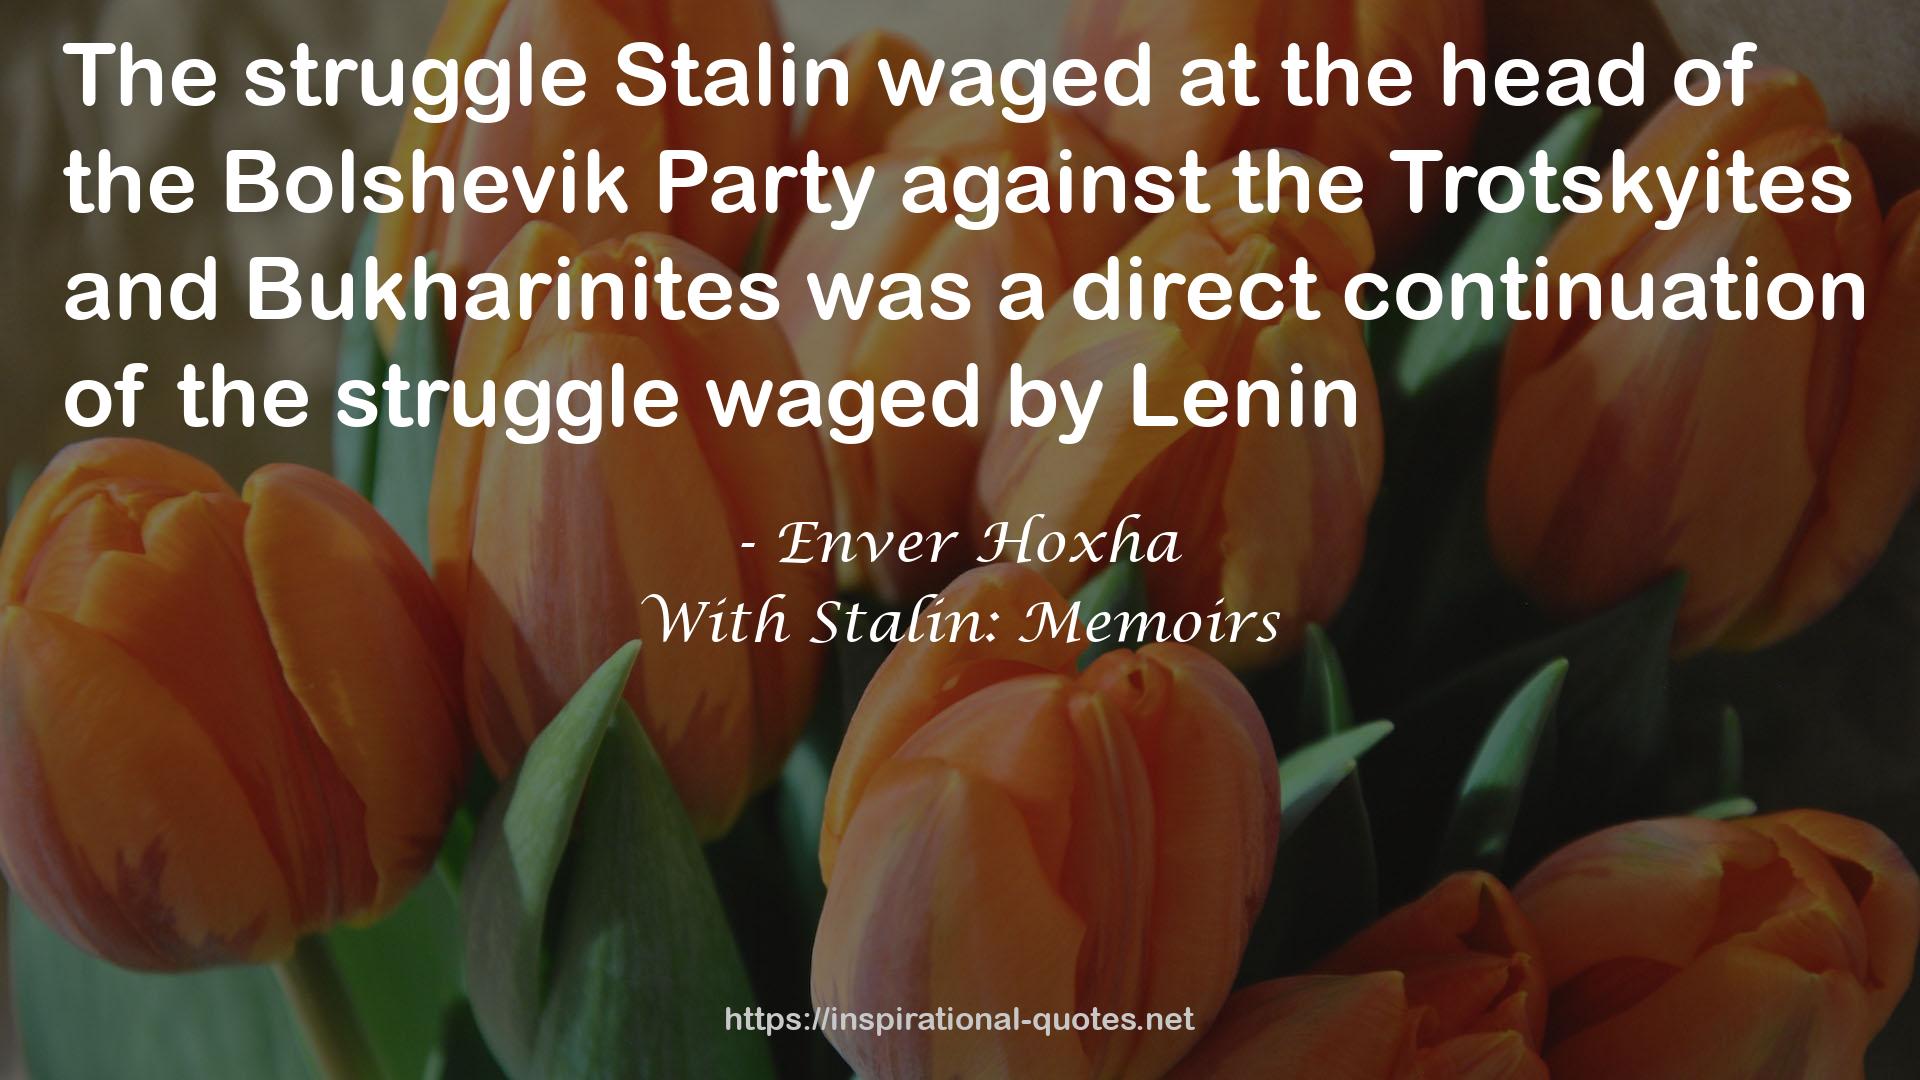 With Stalin: Memoirs QUOTES